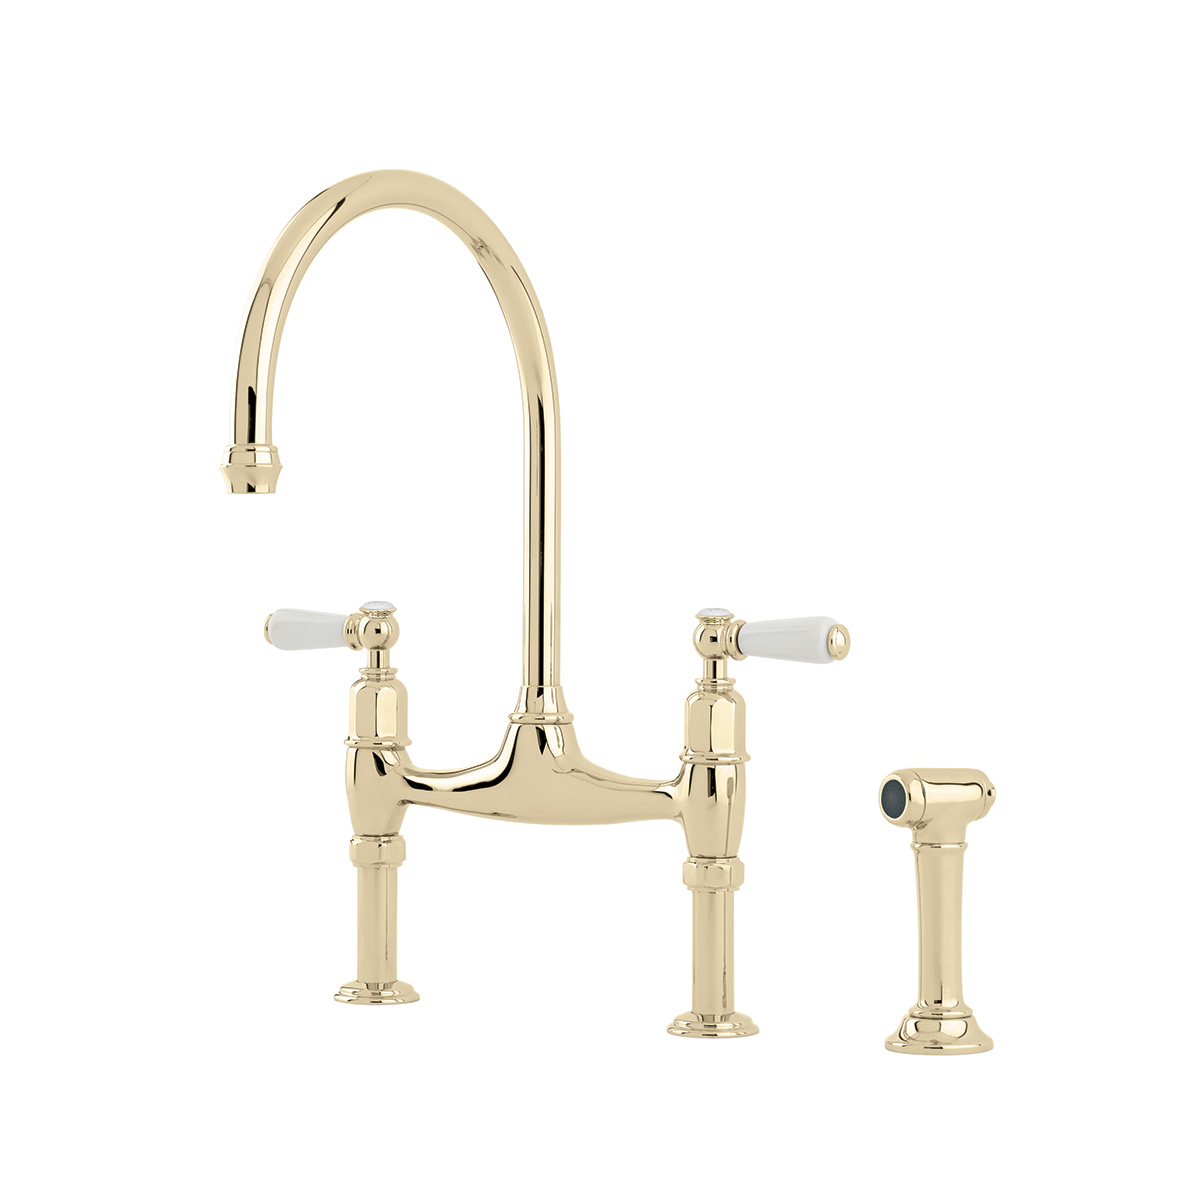 Shaws by Perrin & Rowe Pendleton bridge mixer with spray rinse in gold. Ionian style kitchen tap with straight unions AUSH.4173. Distributed in Australia by Luxe by Design, Brisbane.